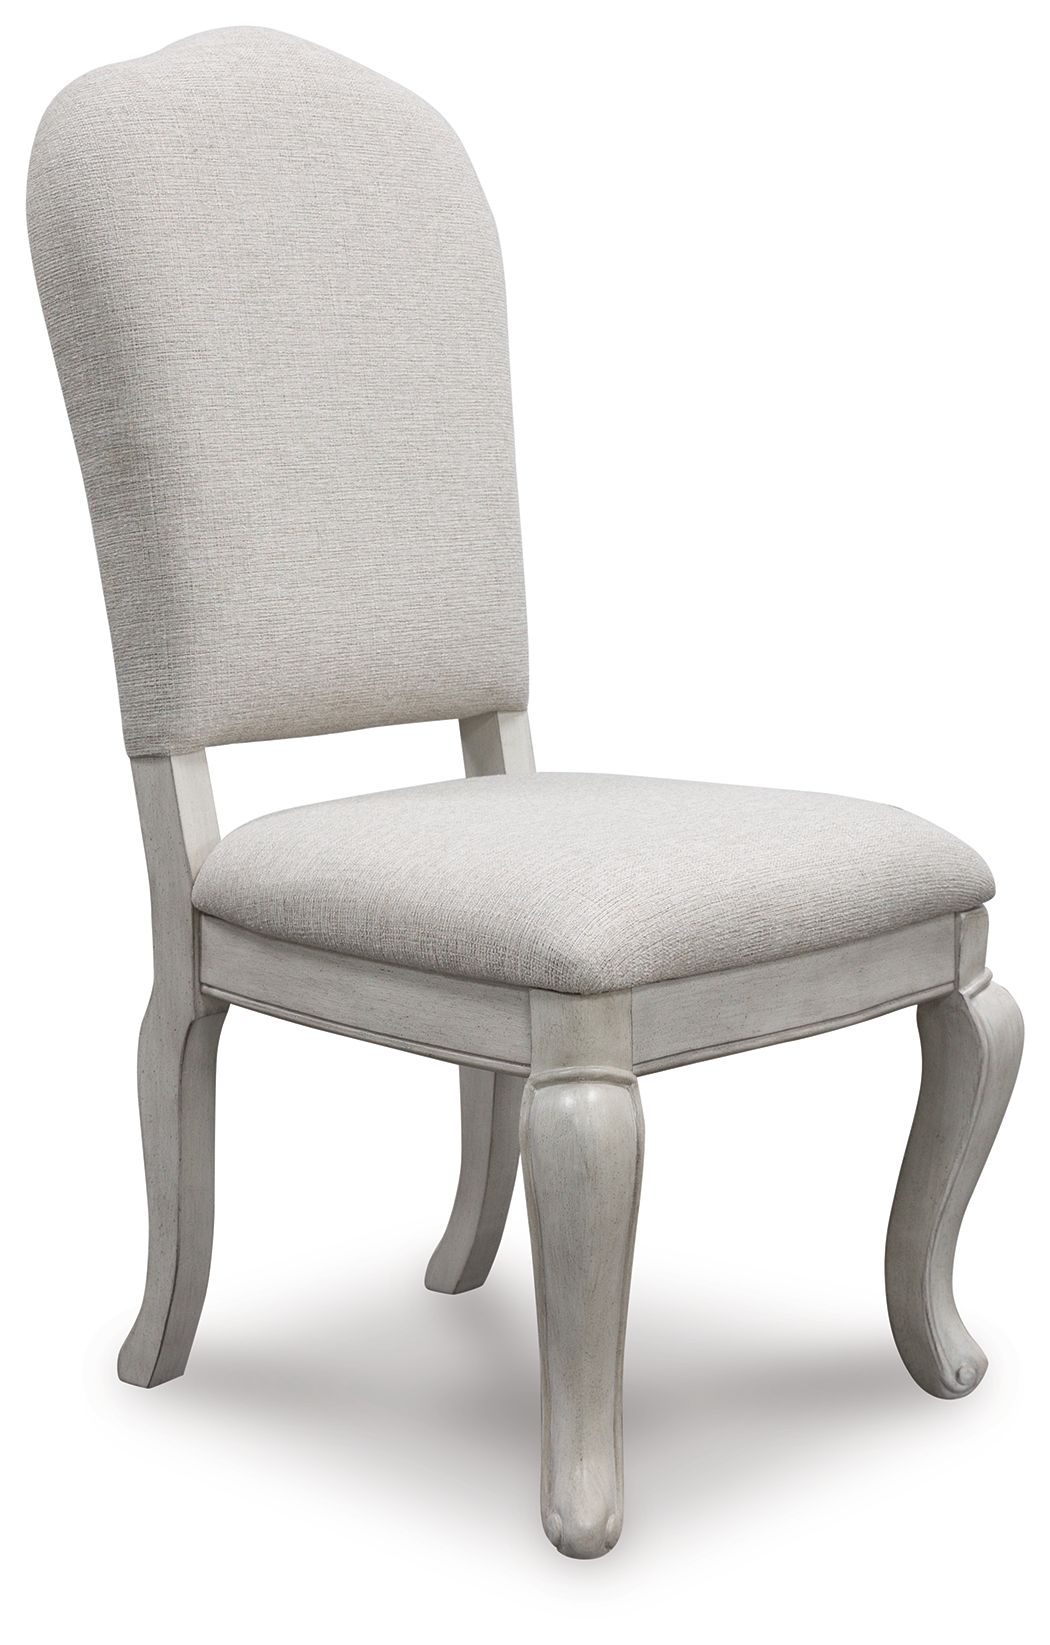 Arlendyne - Antique White - Dining Uph Side Chair (Set of 2) Tony's Home Furnishings Furniture. Beds. Dressers. Sofas.